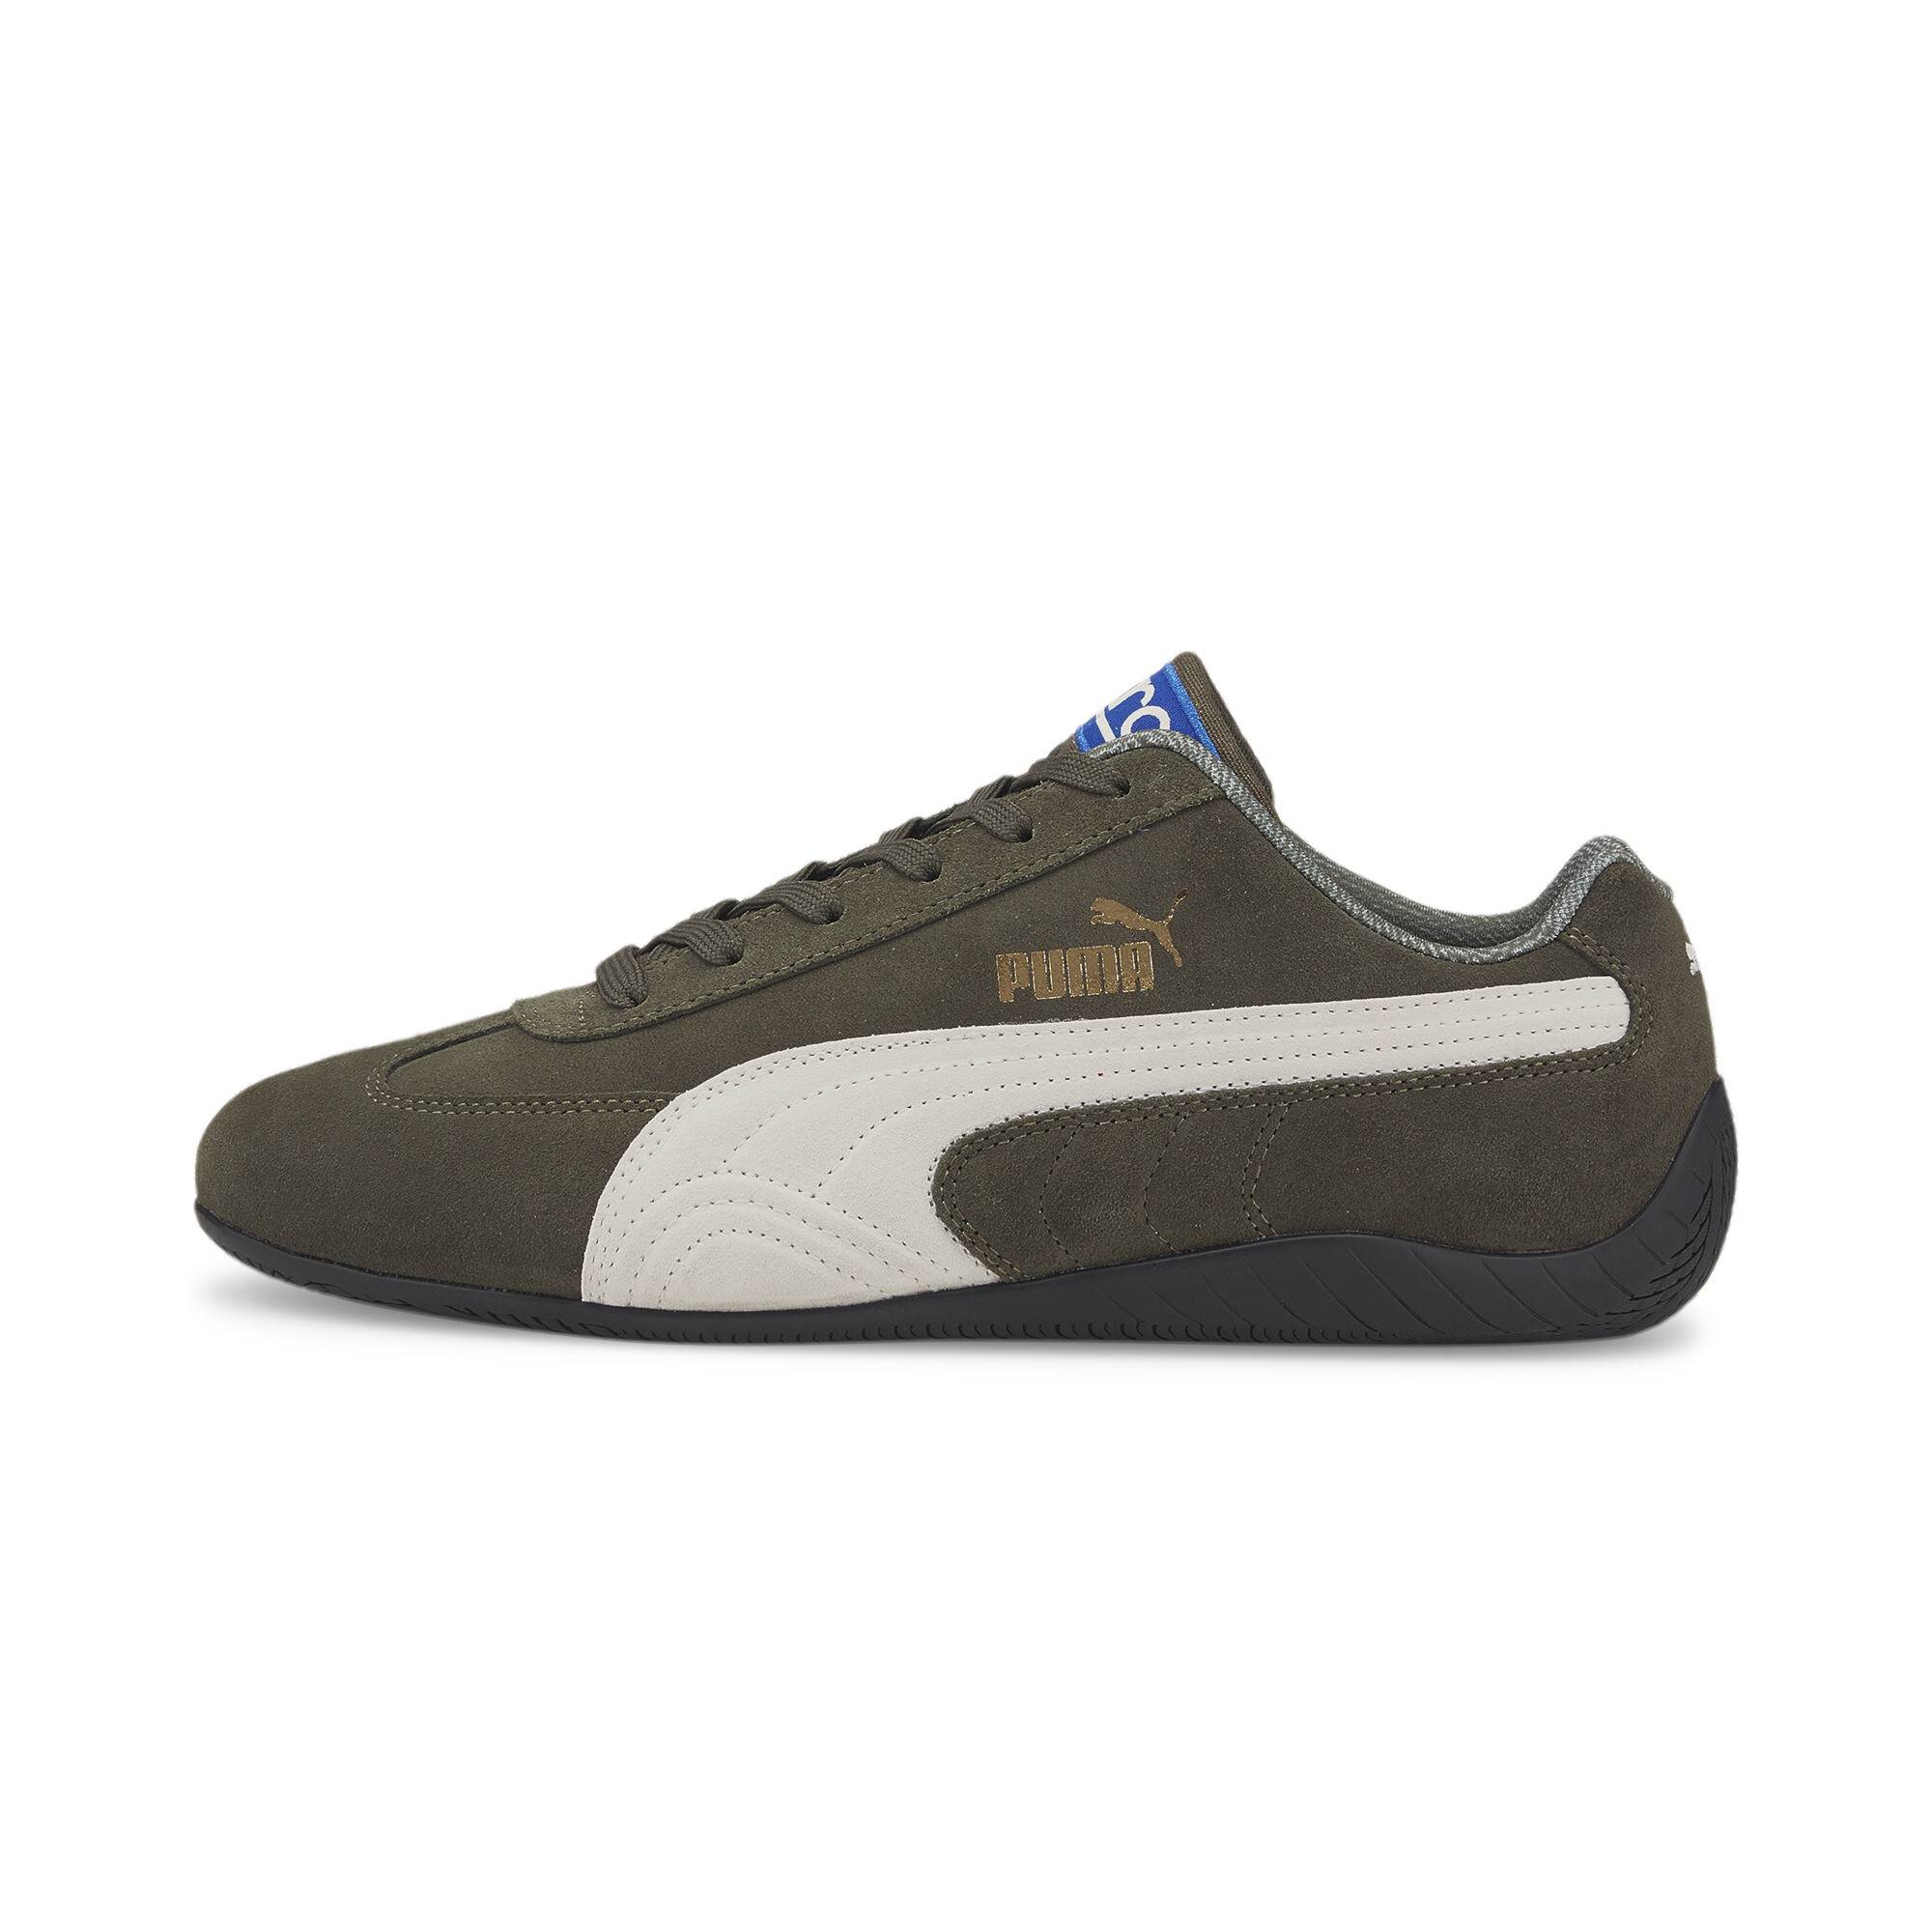 PUMA x SPARCO Speedcat OG Driving Shoes Motorsport Trainers Lace Up Unisex